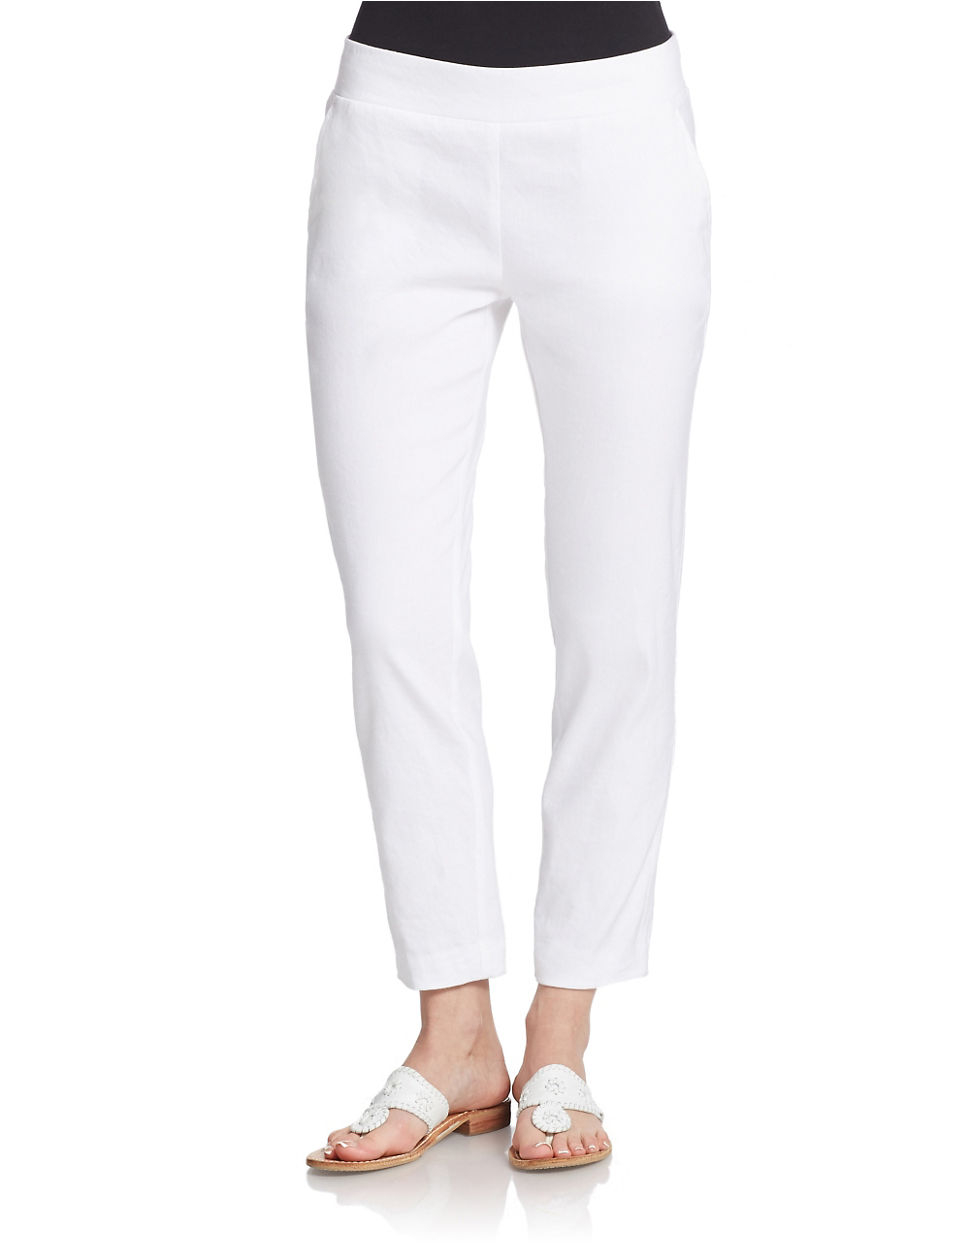 Lyst - Dkny Cropped Pull On Pants in White